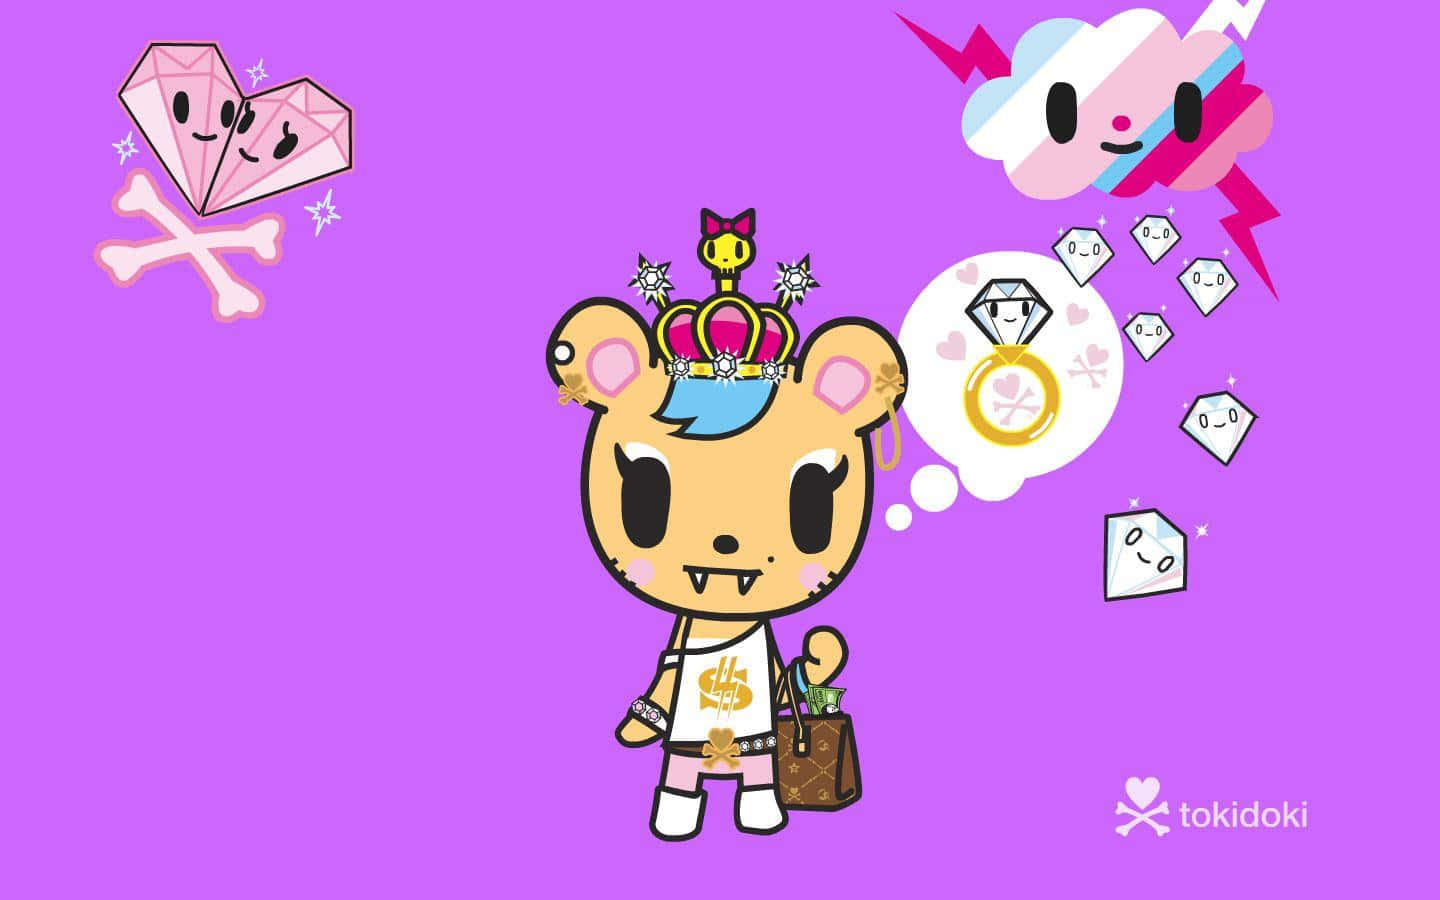 Celebrate bright colors and unique characters with Tokidoki! Wallpaper